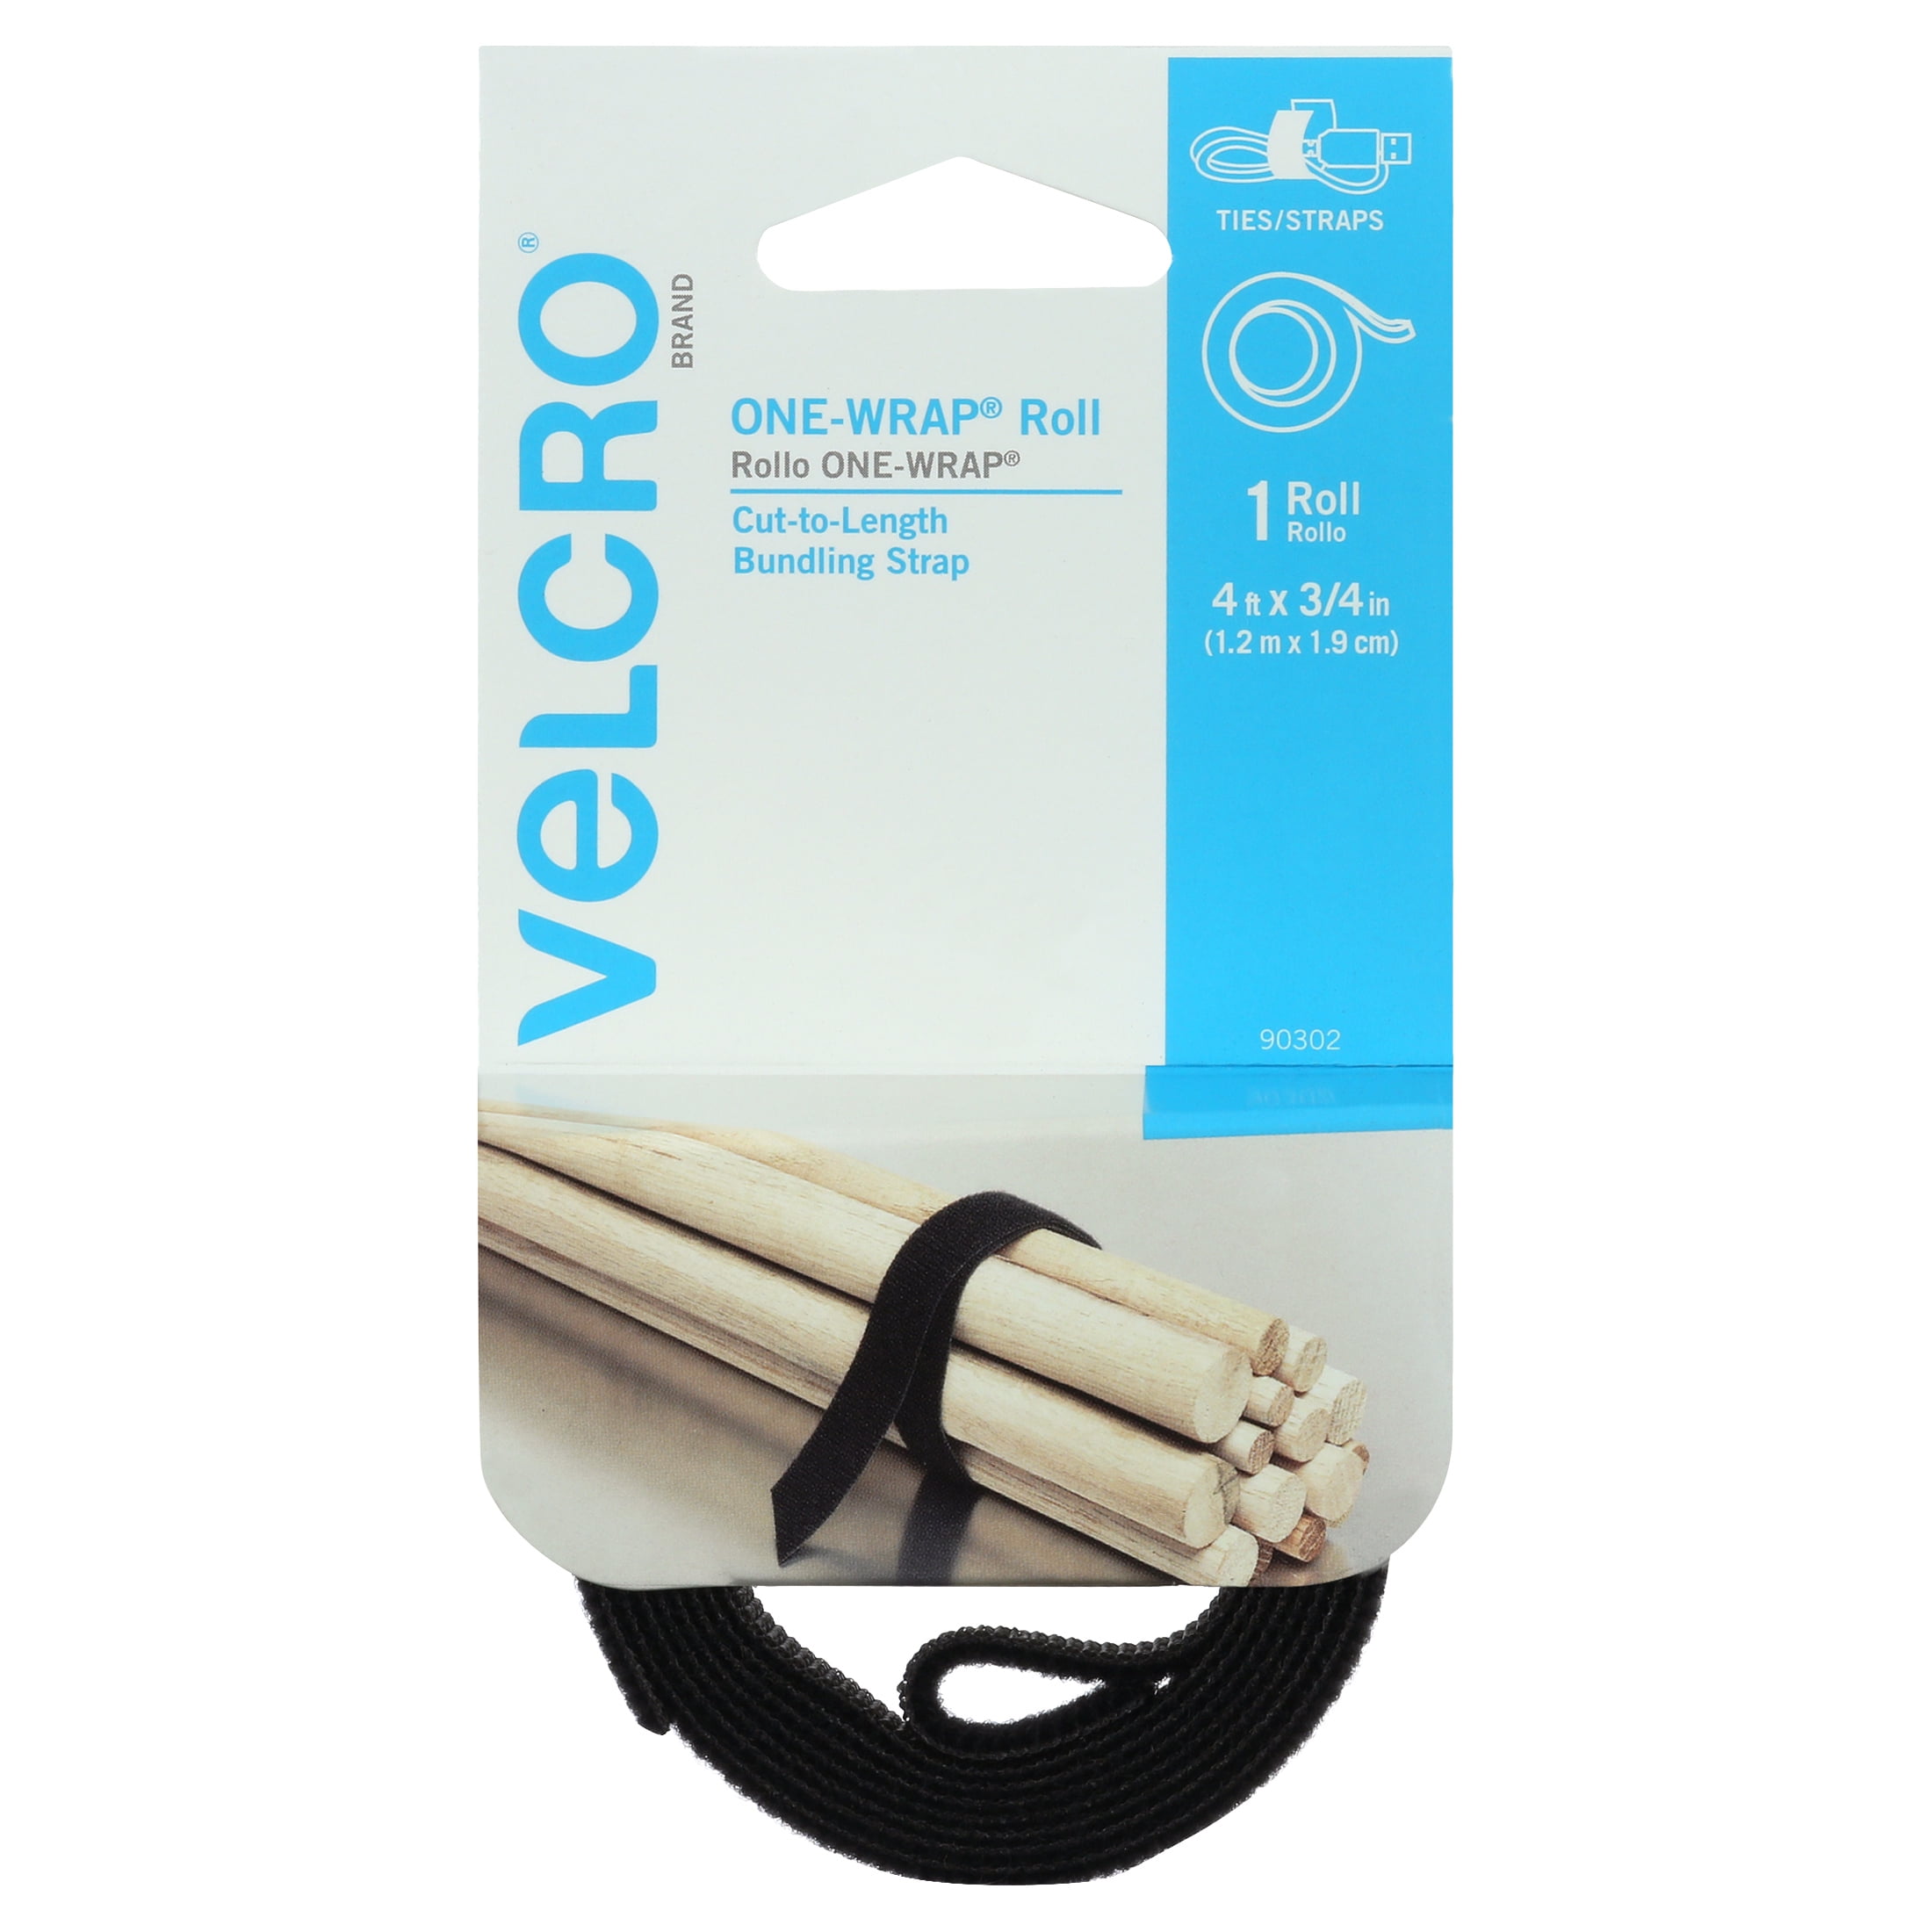 VELCRO Brand ONE-WRAP Double Sided Roll. Cut to Length Straps Heavy Duty.  Bundling Ties Fasten to Themselves for Secure Hold. 45 Ft x 1-1/2 In, Black